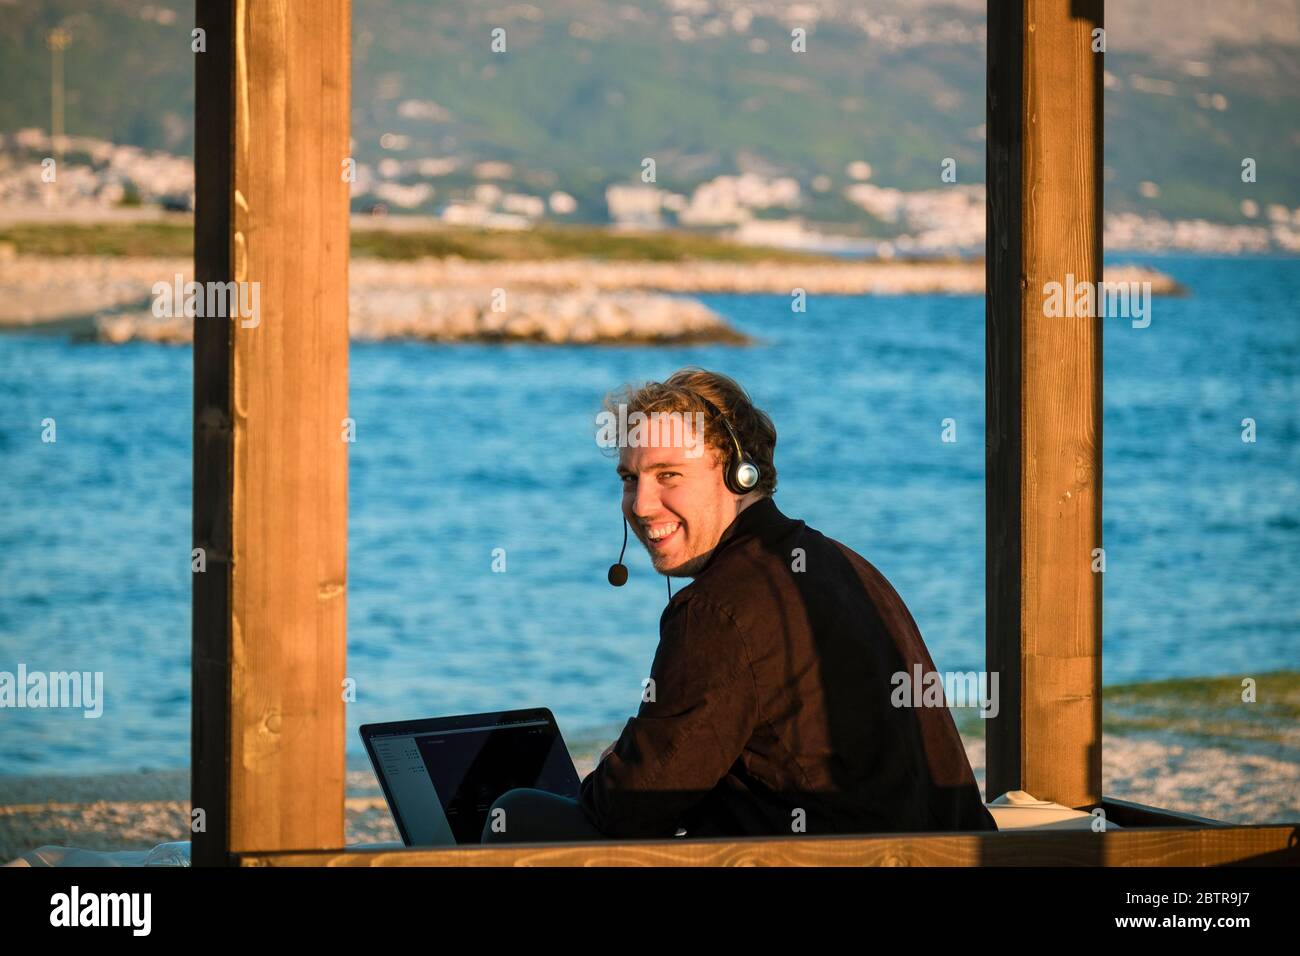 One man using laptop and headset outdoors at a beach Stock Photo